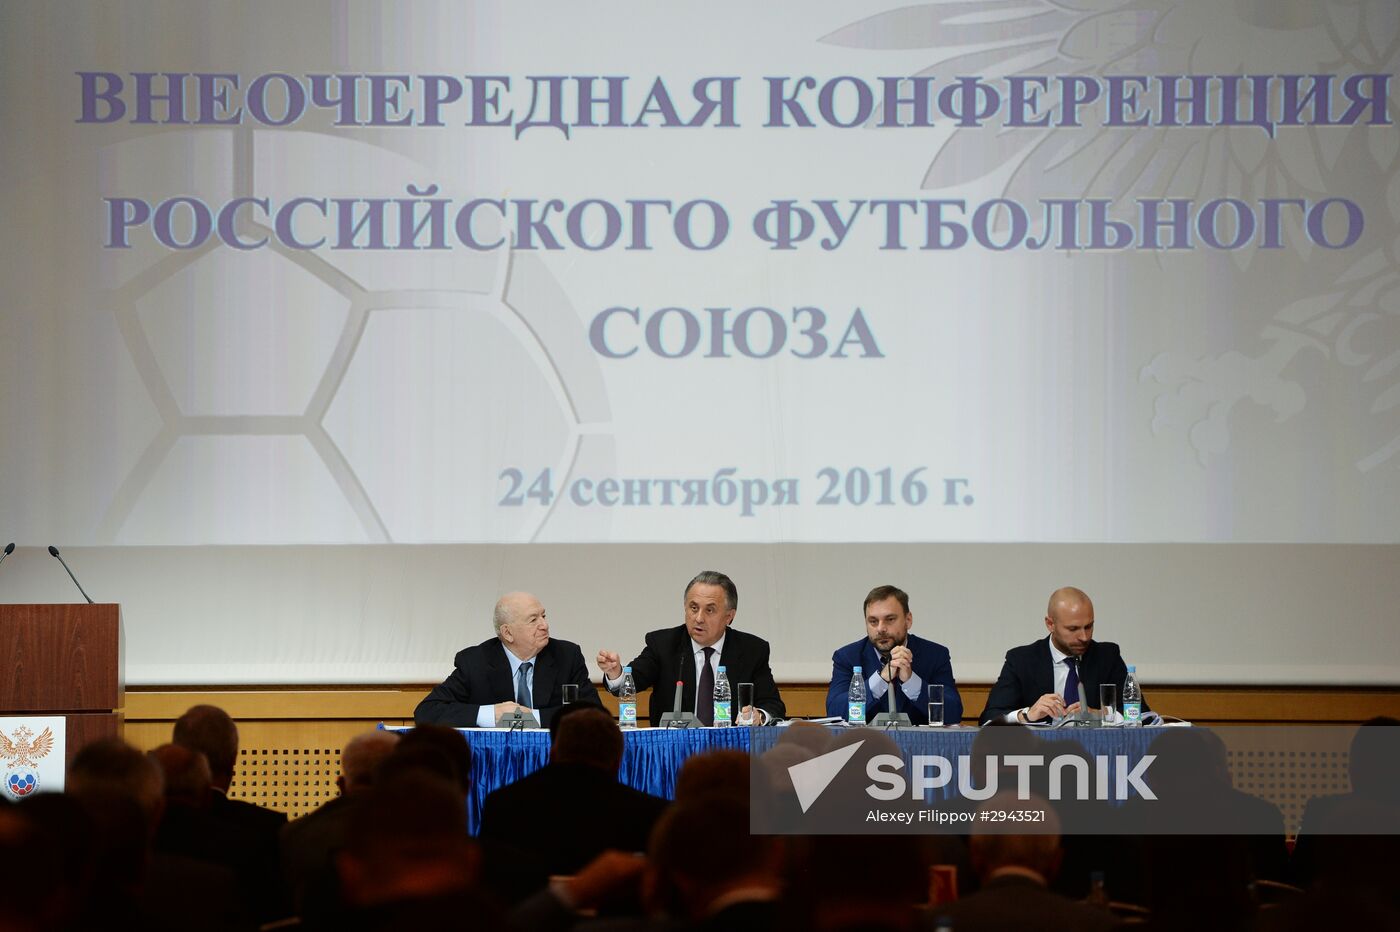 Extraordinary meeting of the Russian Football Union